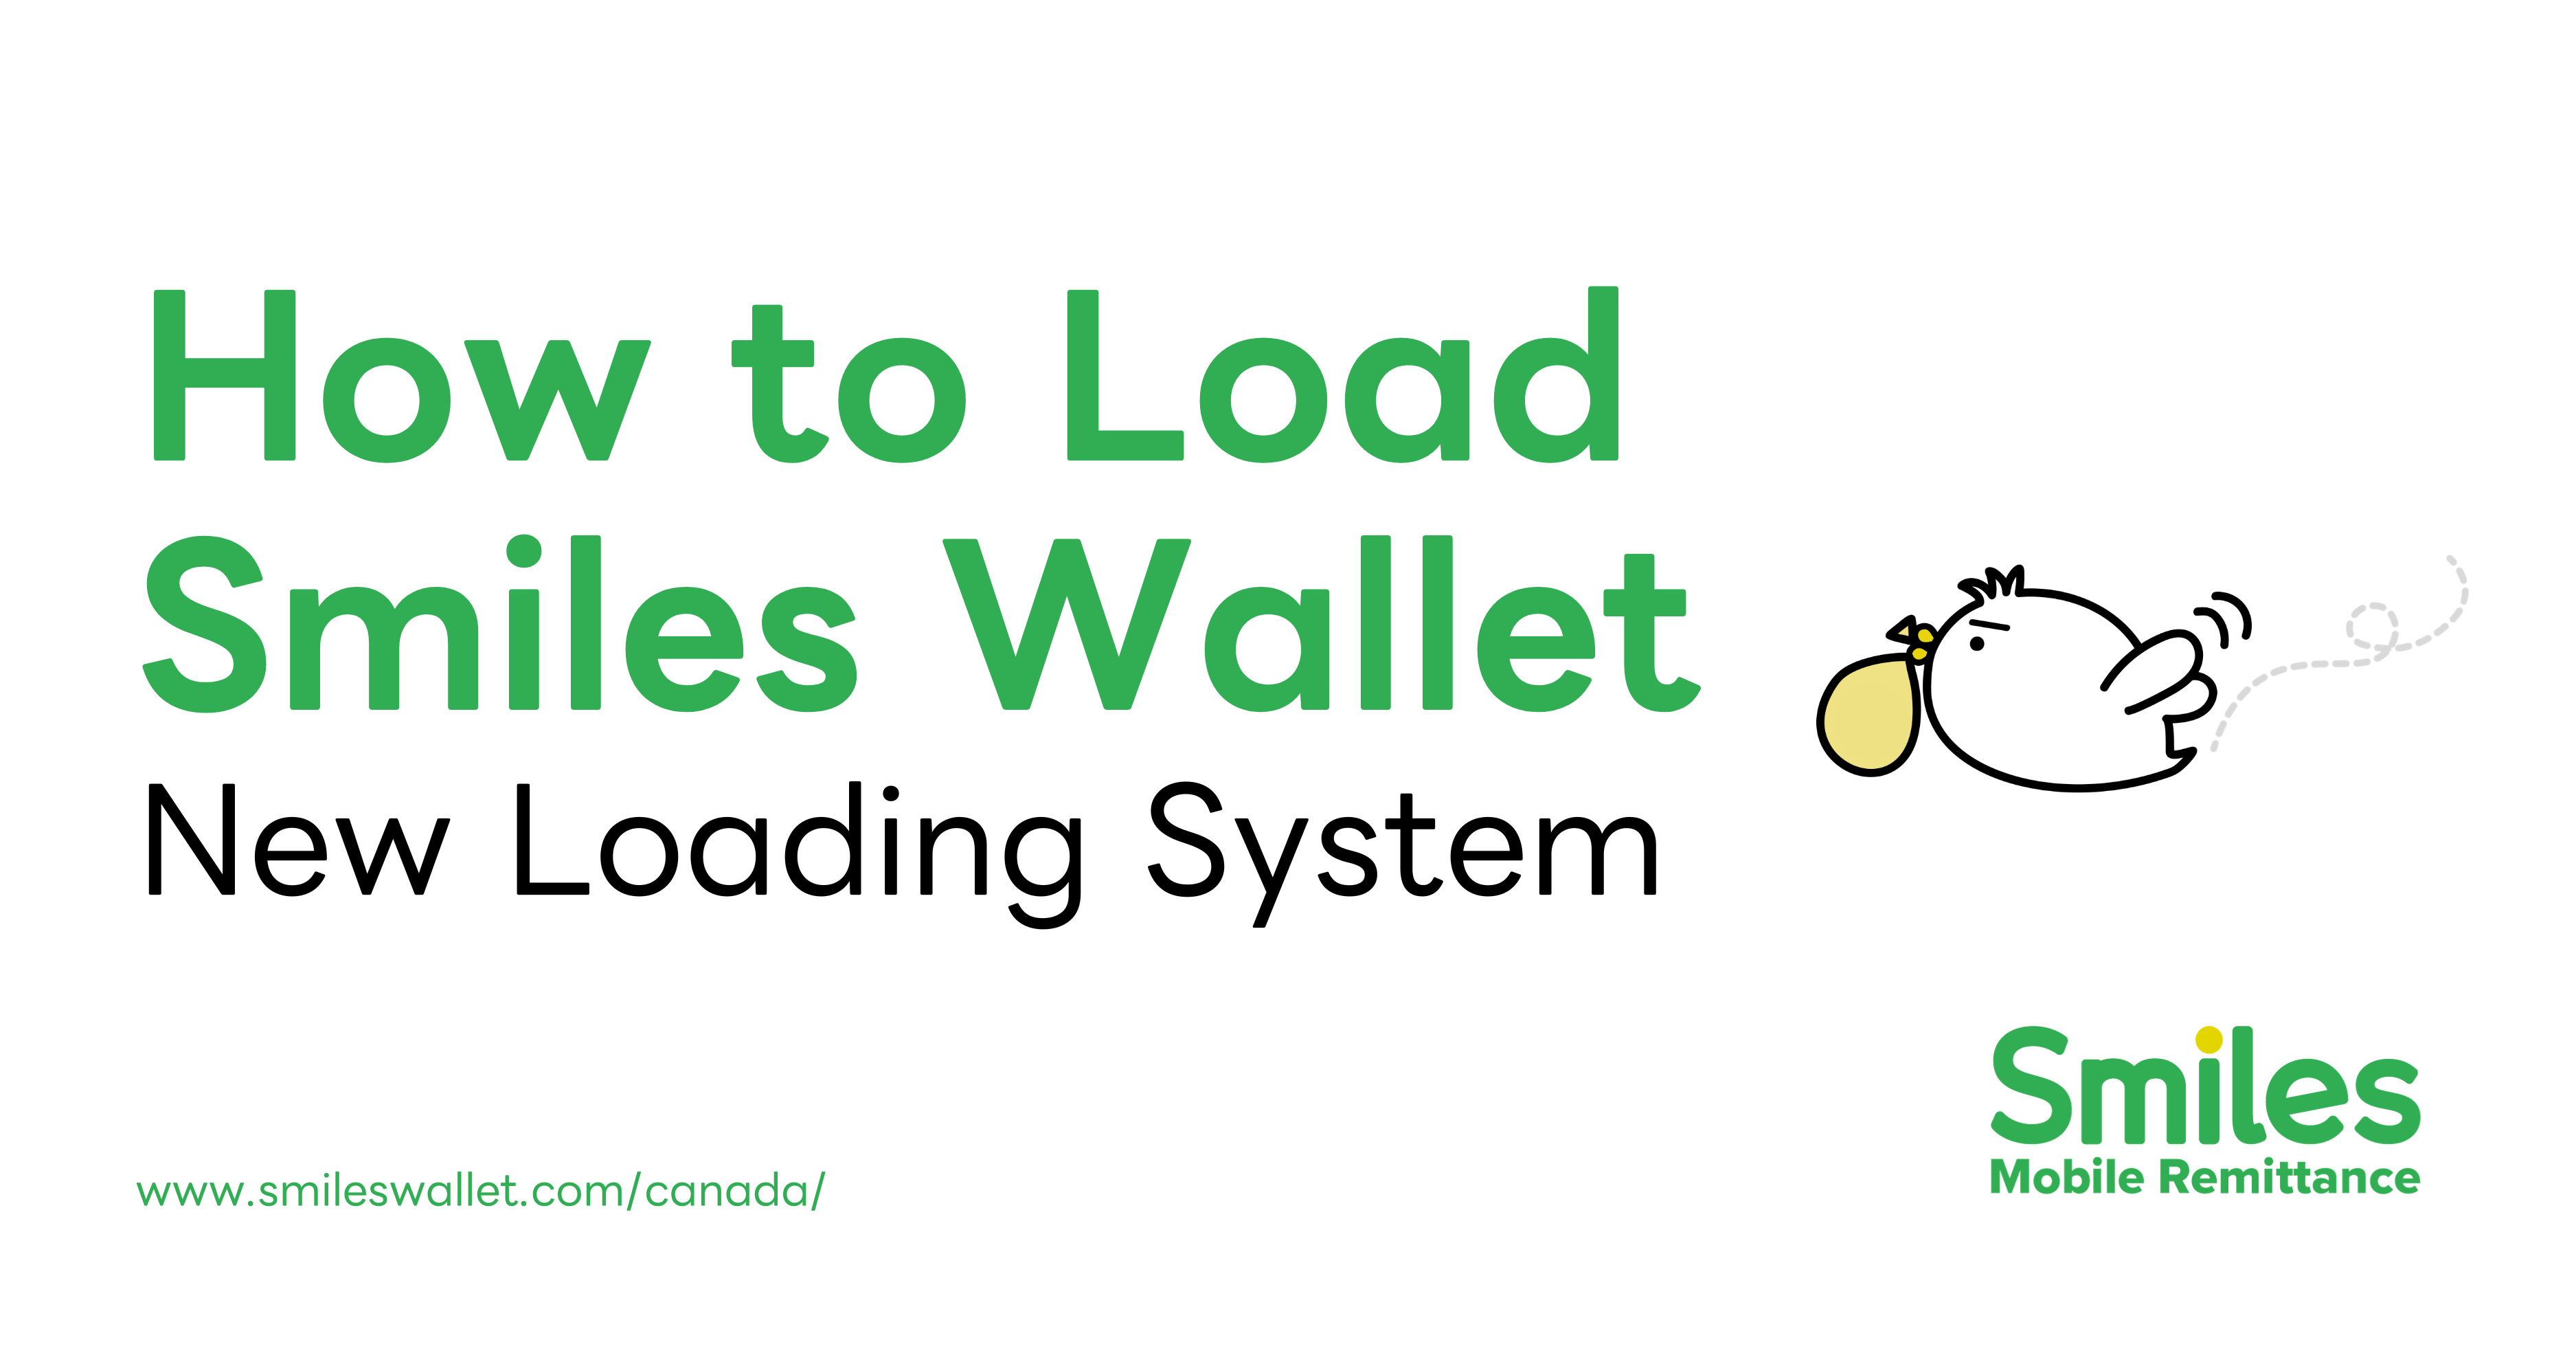 How to Load Smiles Wallet